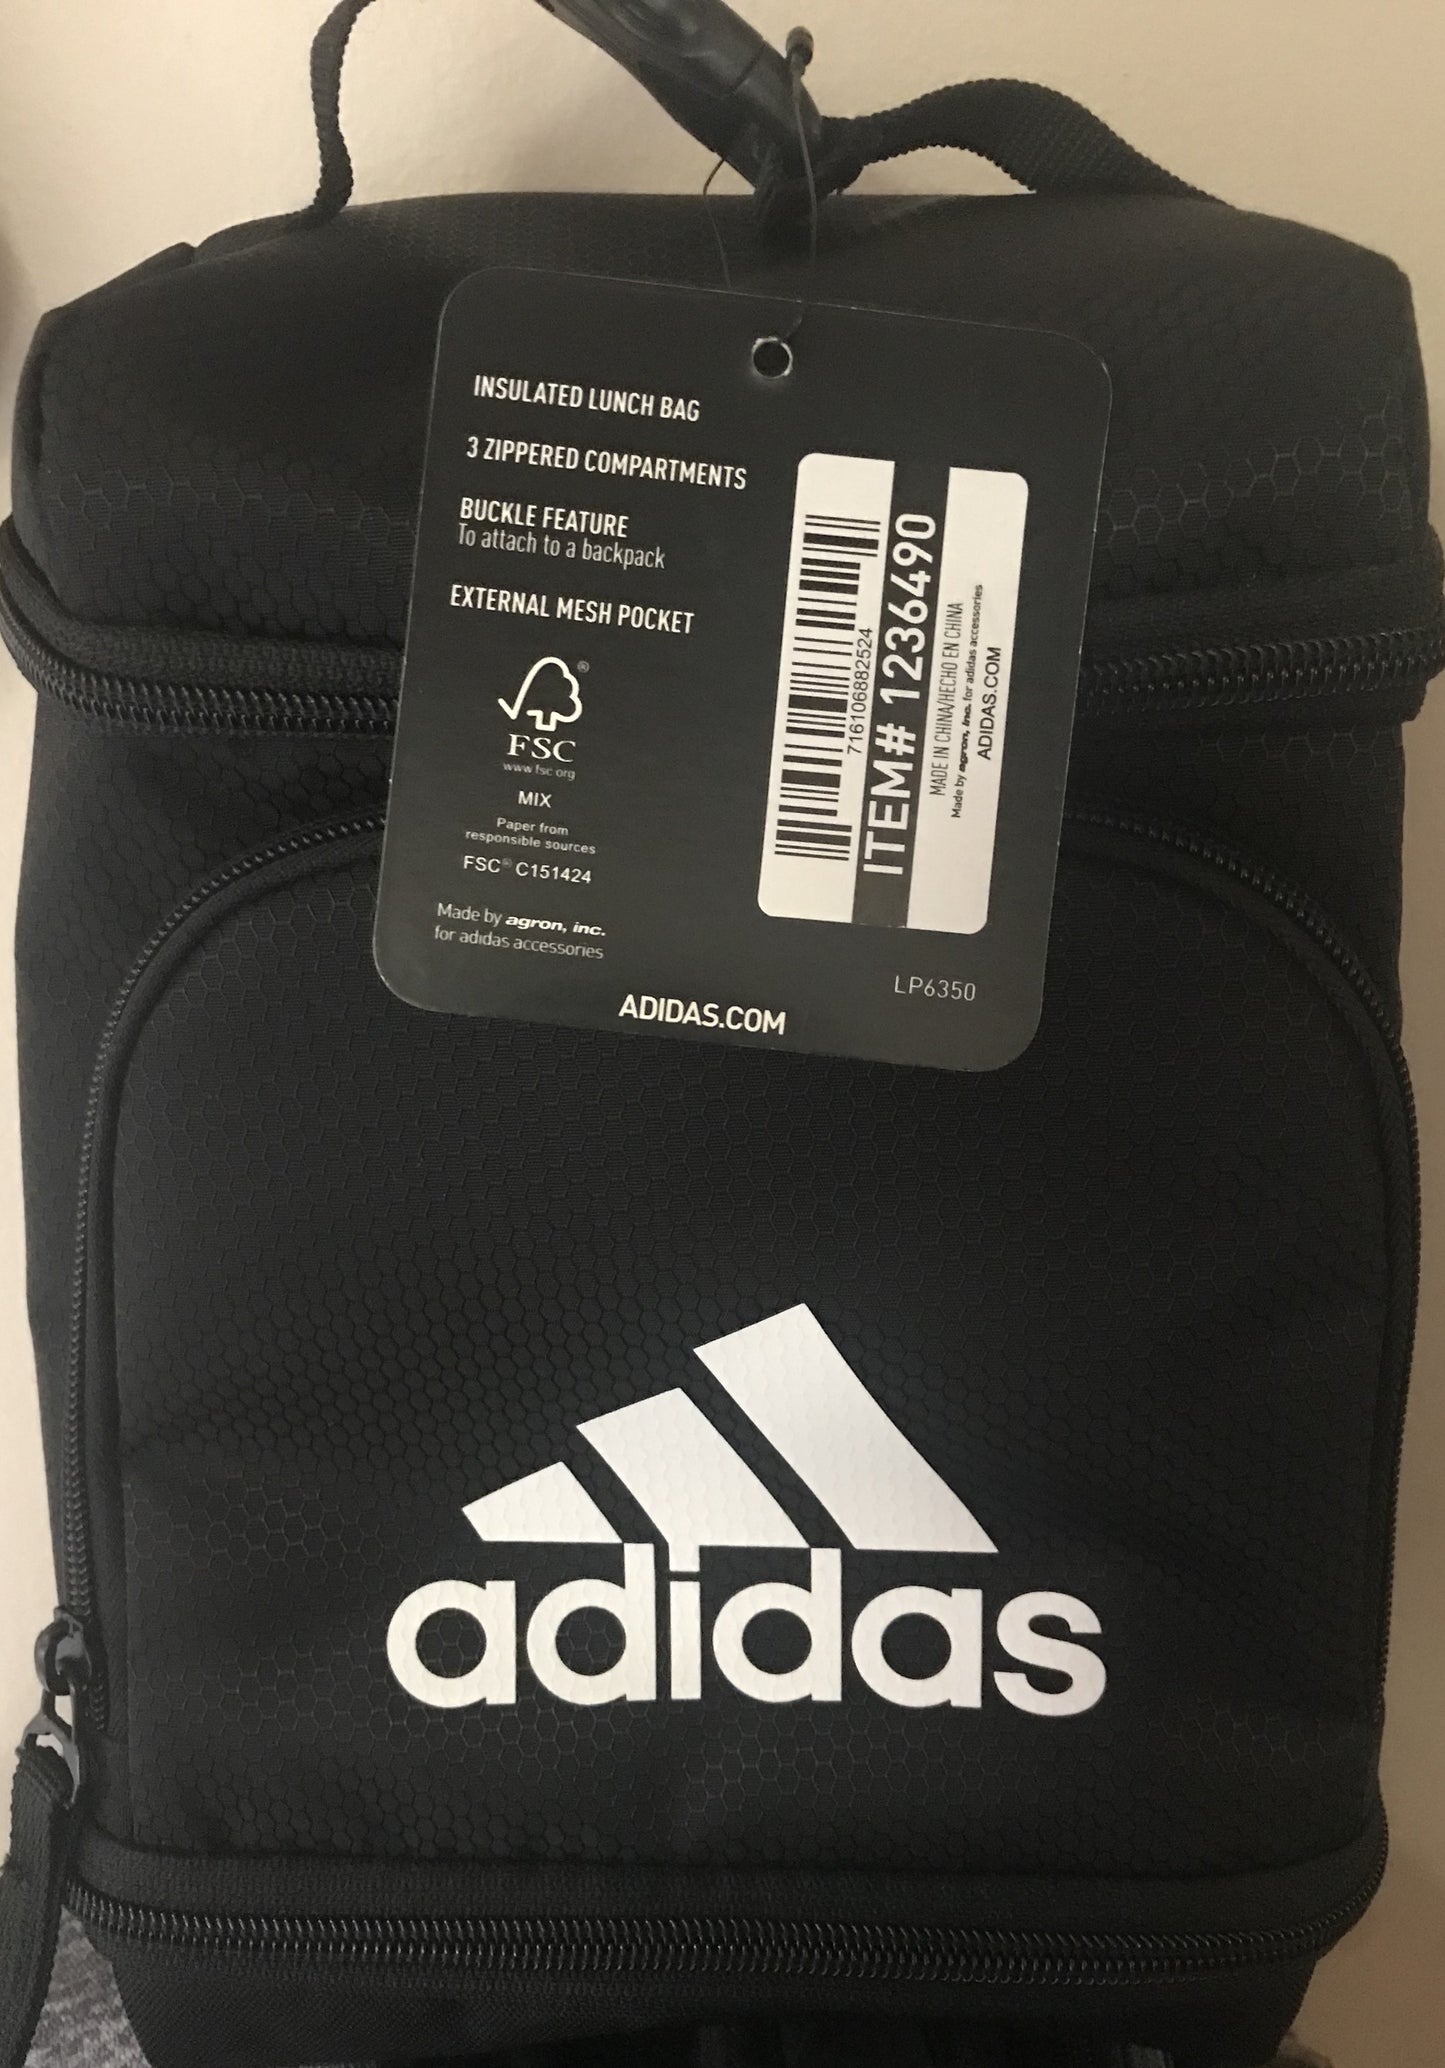 Adidas Excel Lunch Bag, Black, One Size